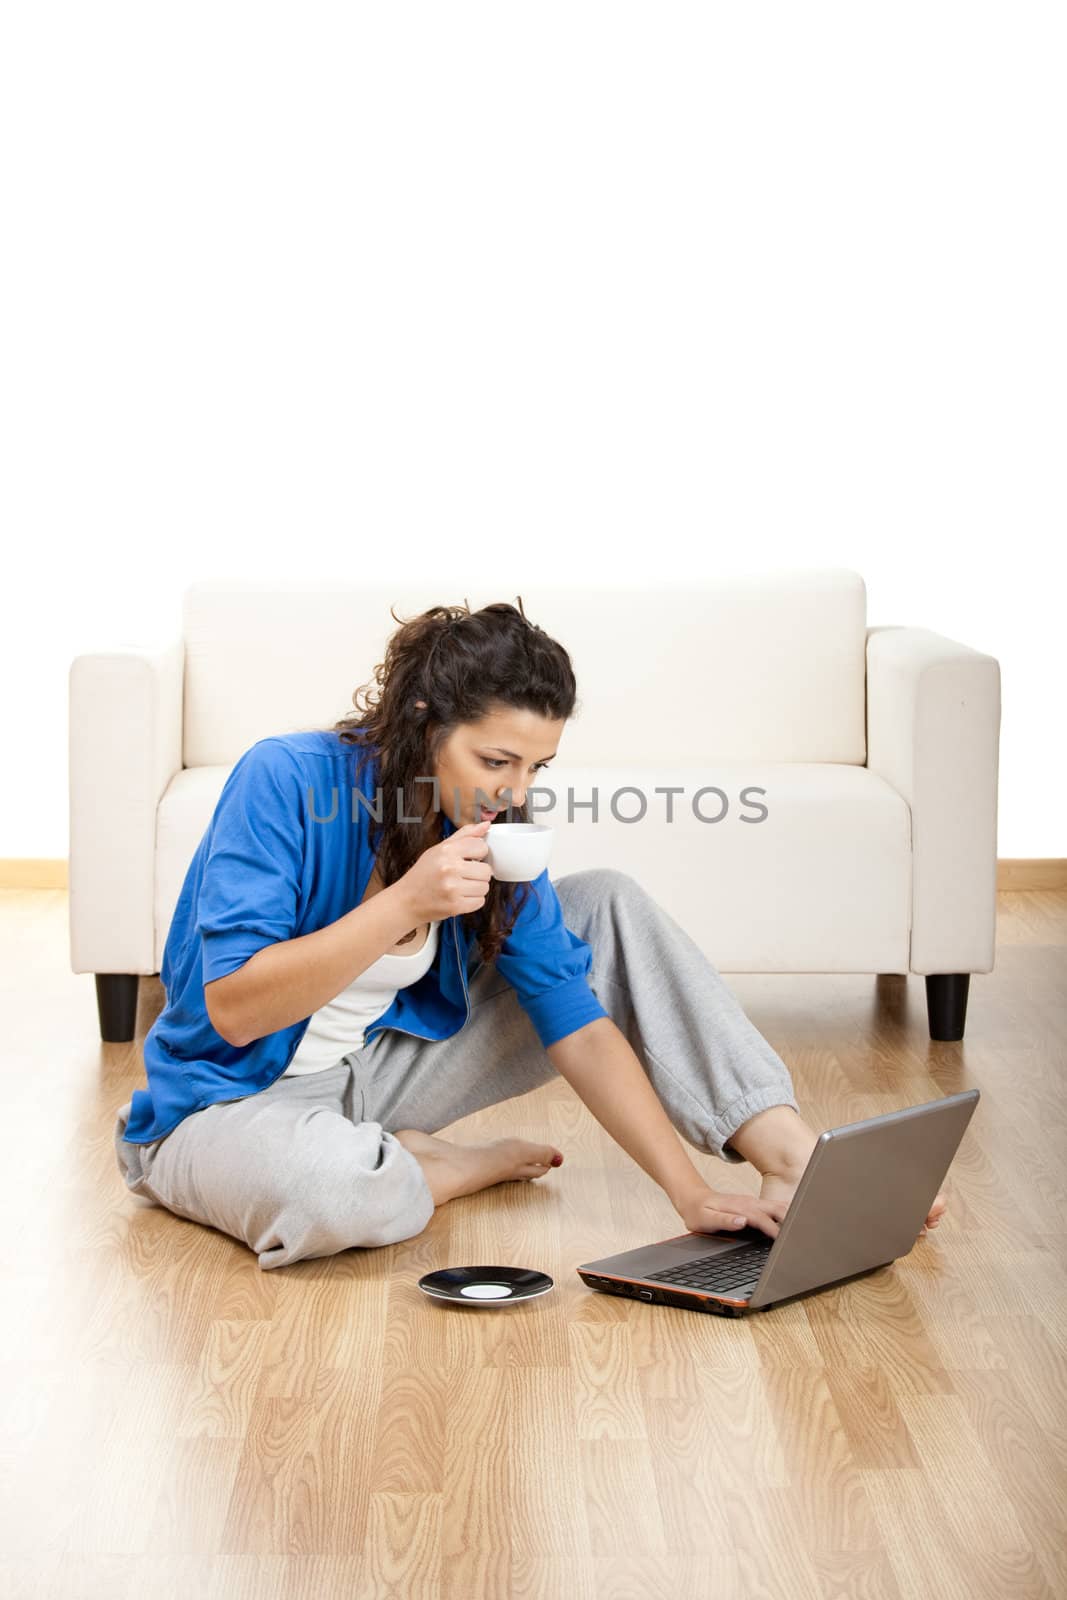 
Portrait of a girl seated on floor and using laptop with a cup of coffee